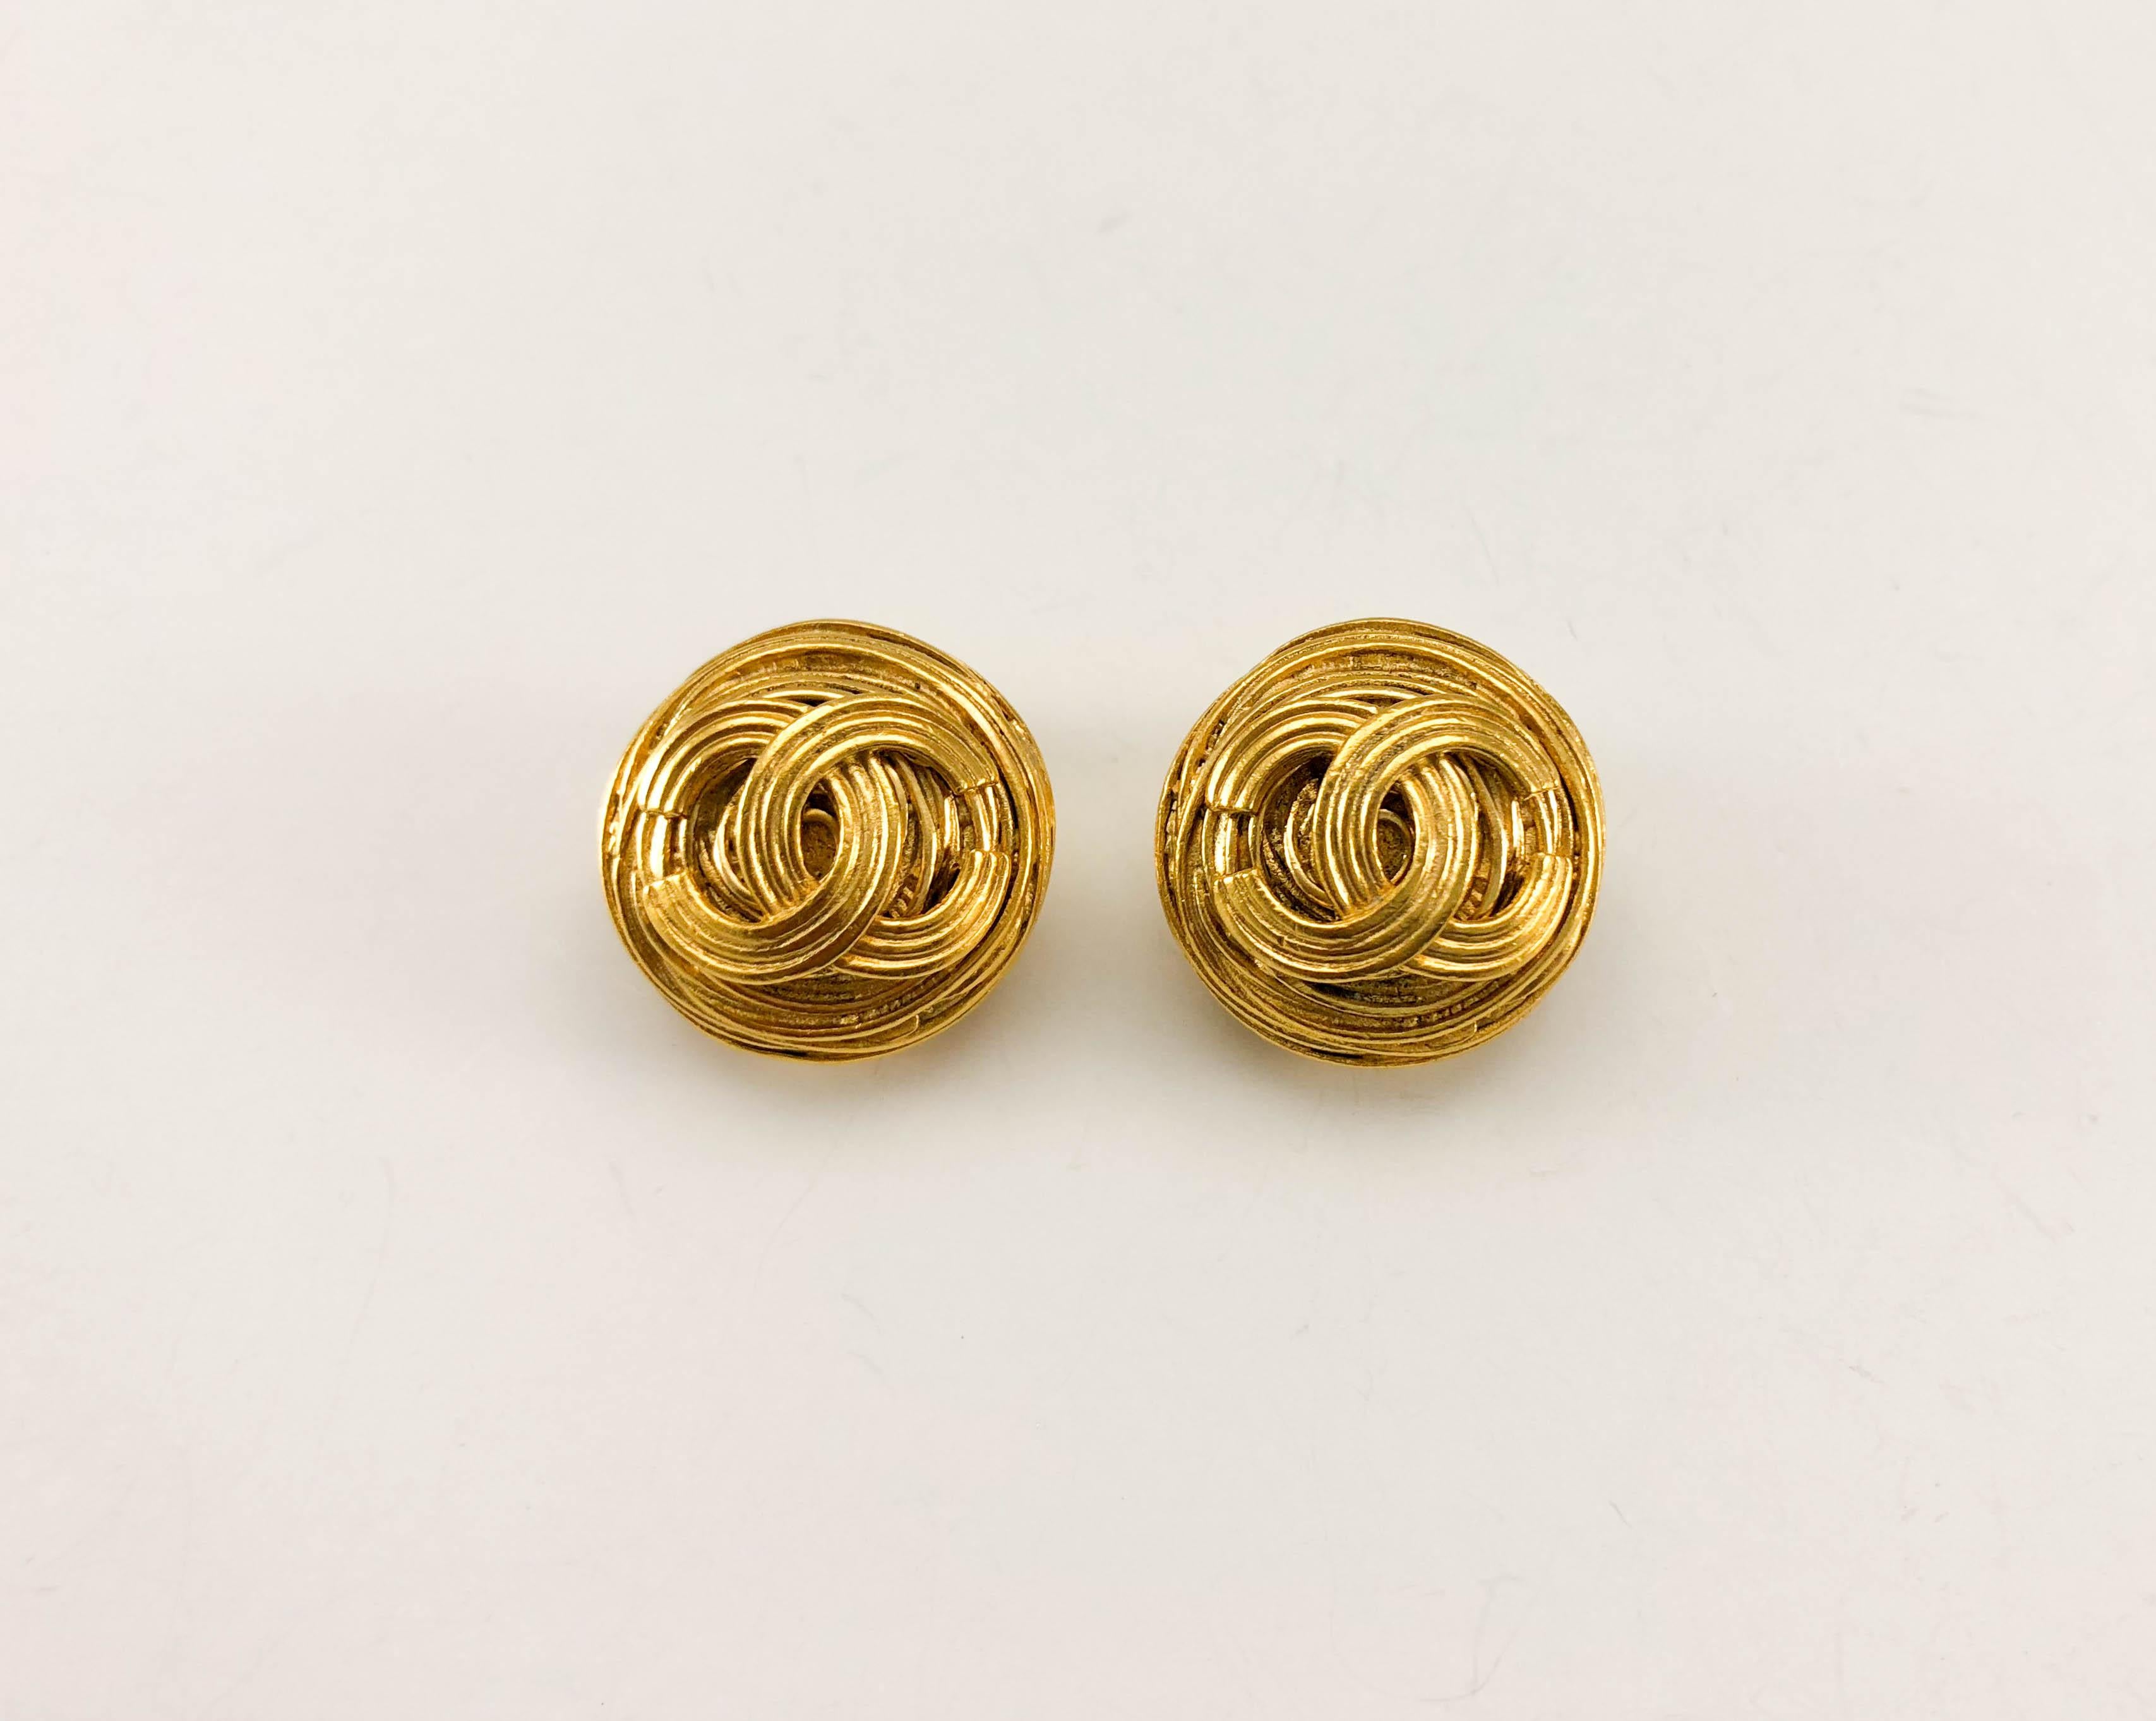 1994 Chanel Gold-Plated Round Logo Earrings In Excellent Condition For Sale In London, Chelsea